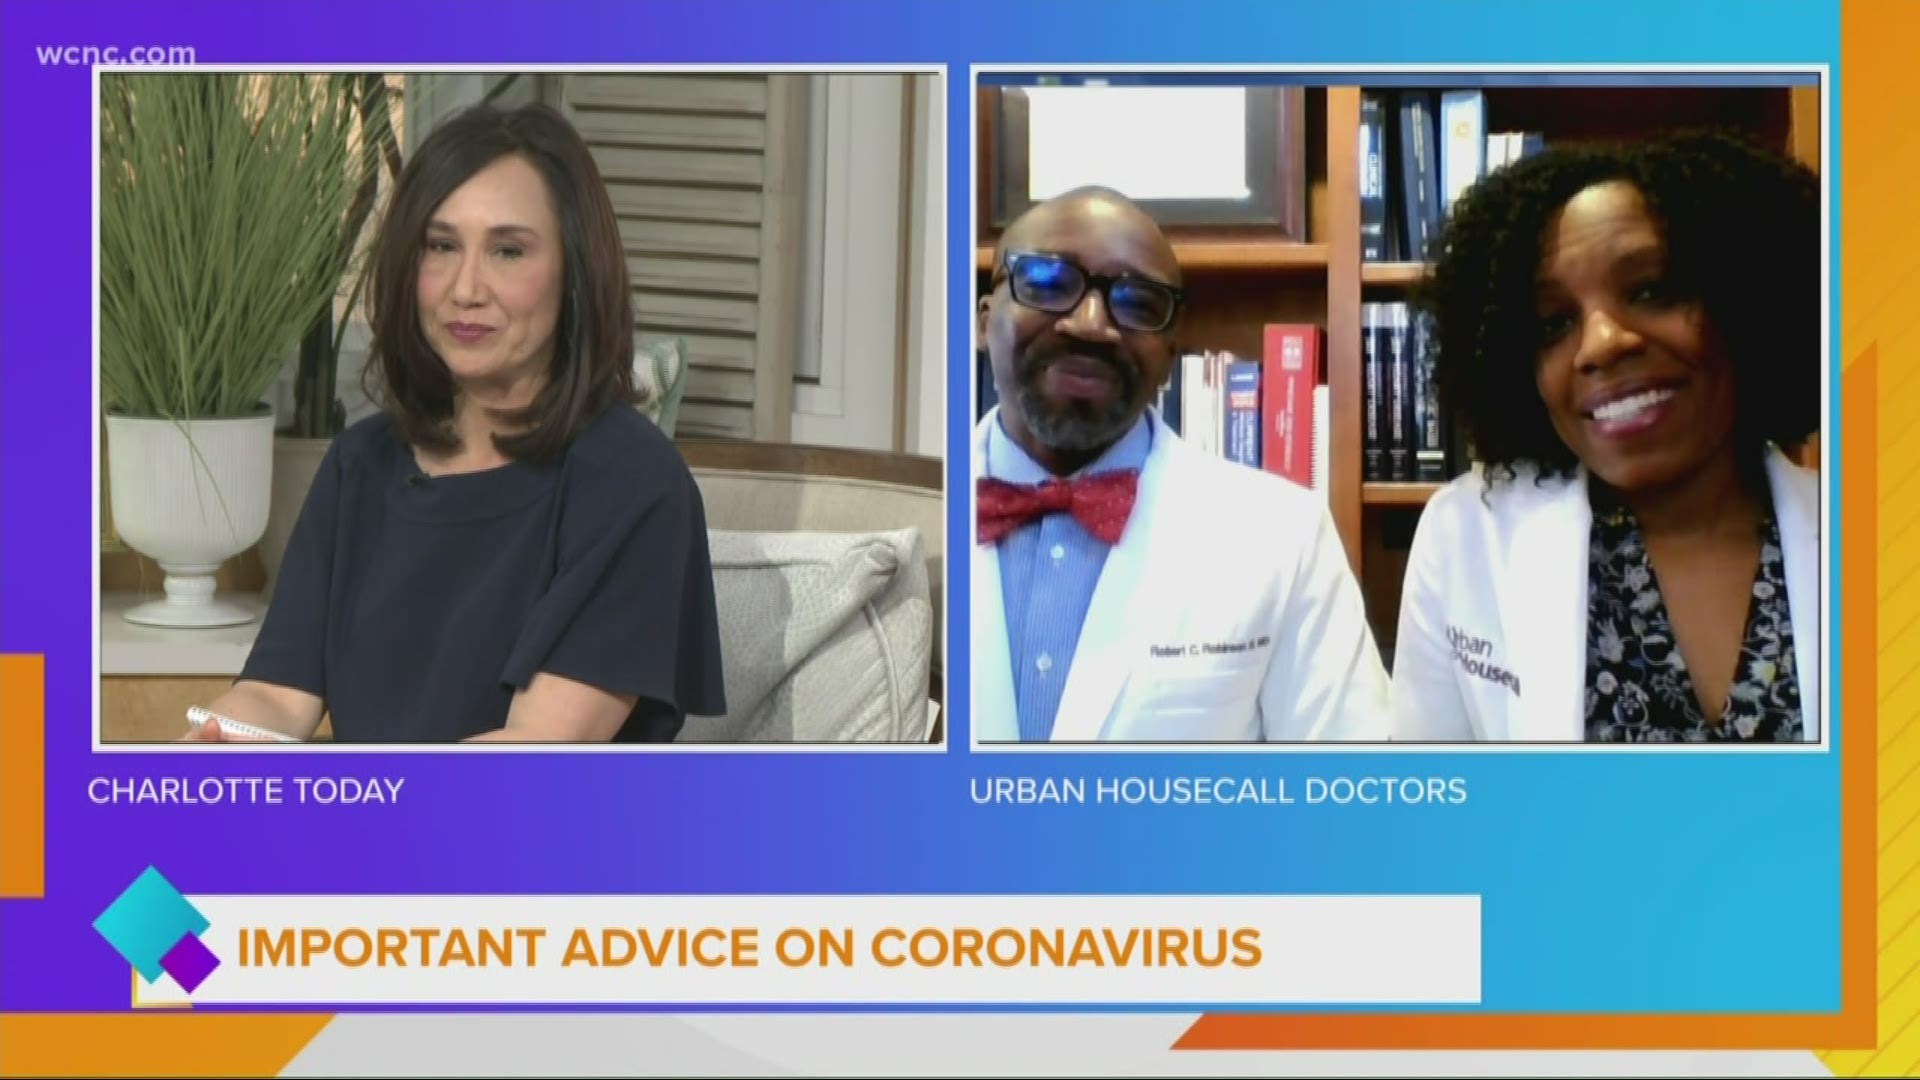 The Urban Housecall Doctors discuss how the coronavirus is affecting Charlotte communities.